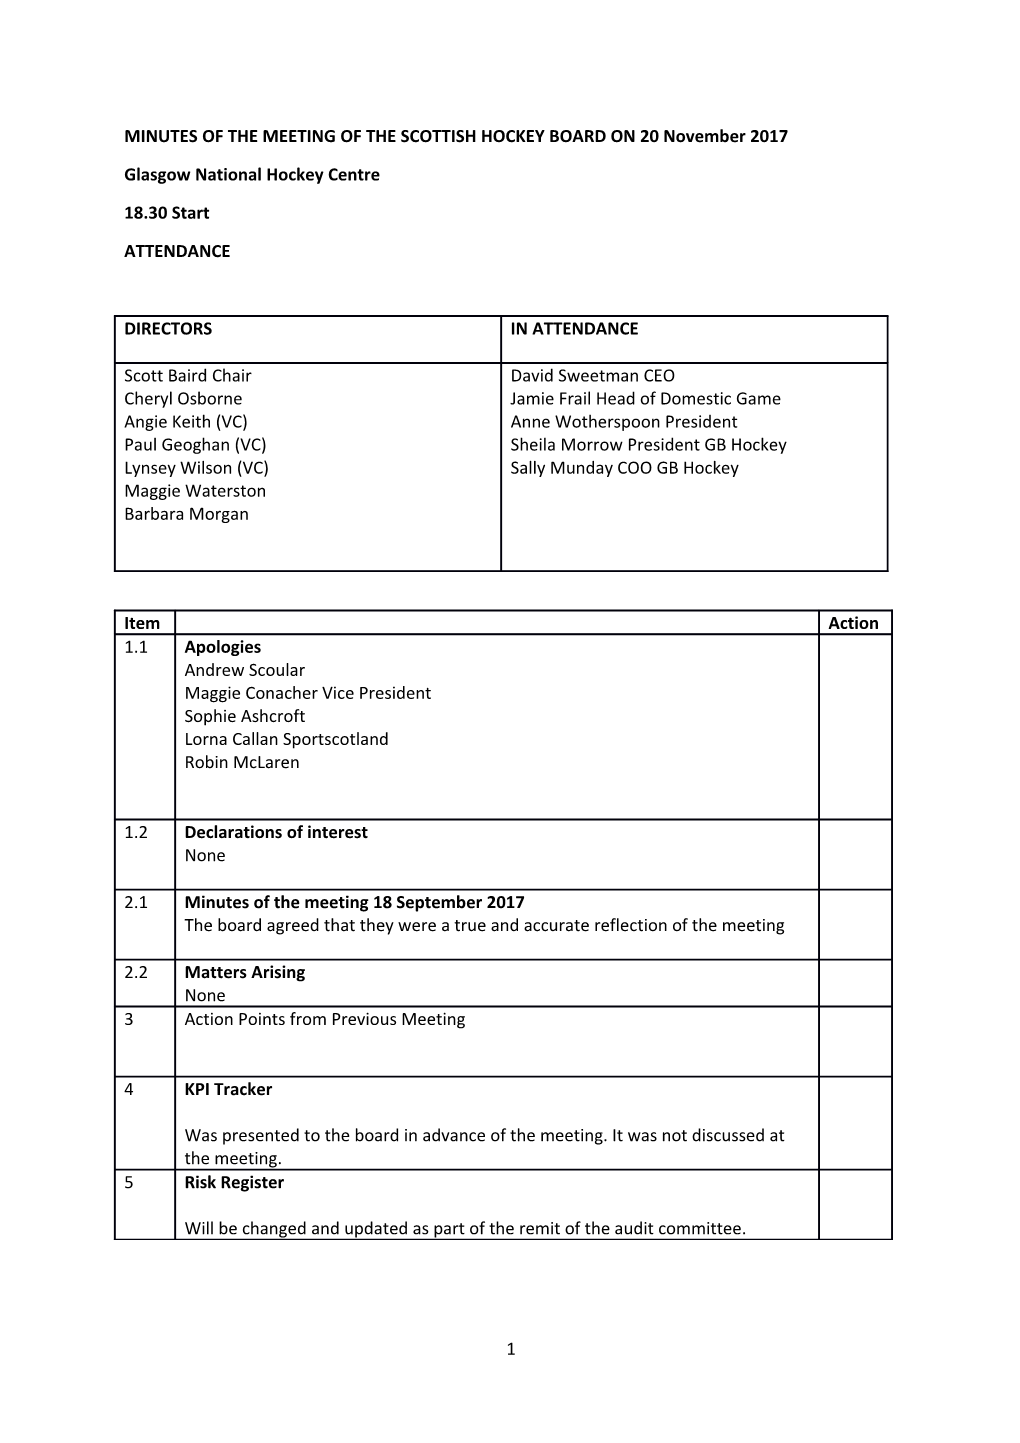 MINUTES of the MEETING of the SCOTTISH HOCKEY BOARD on 20November2017